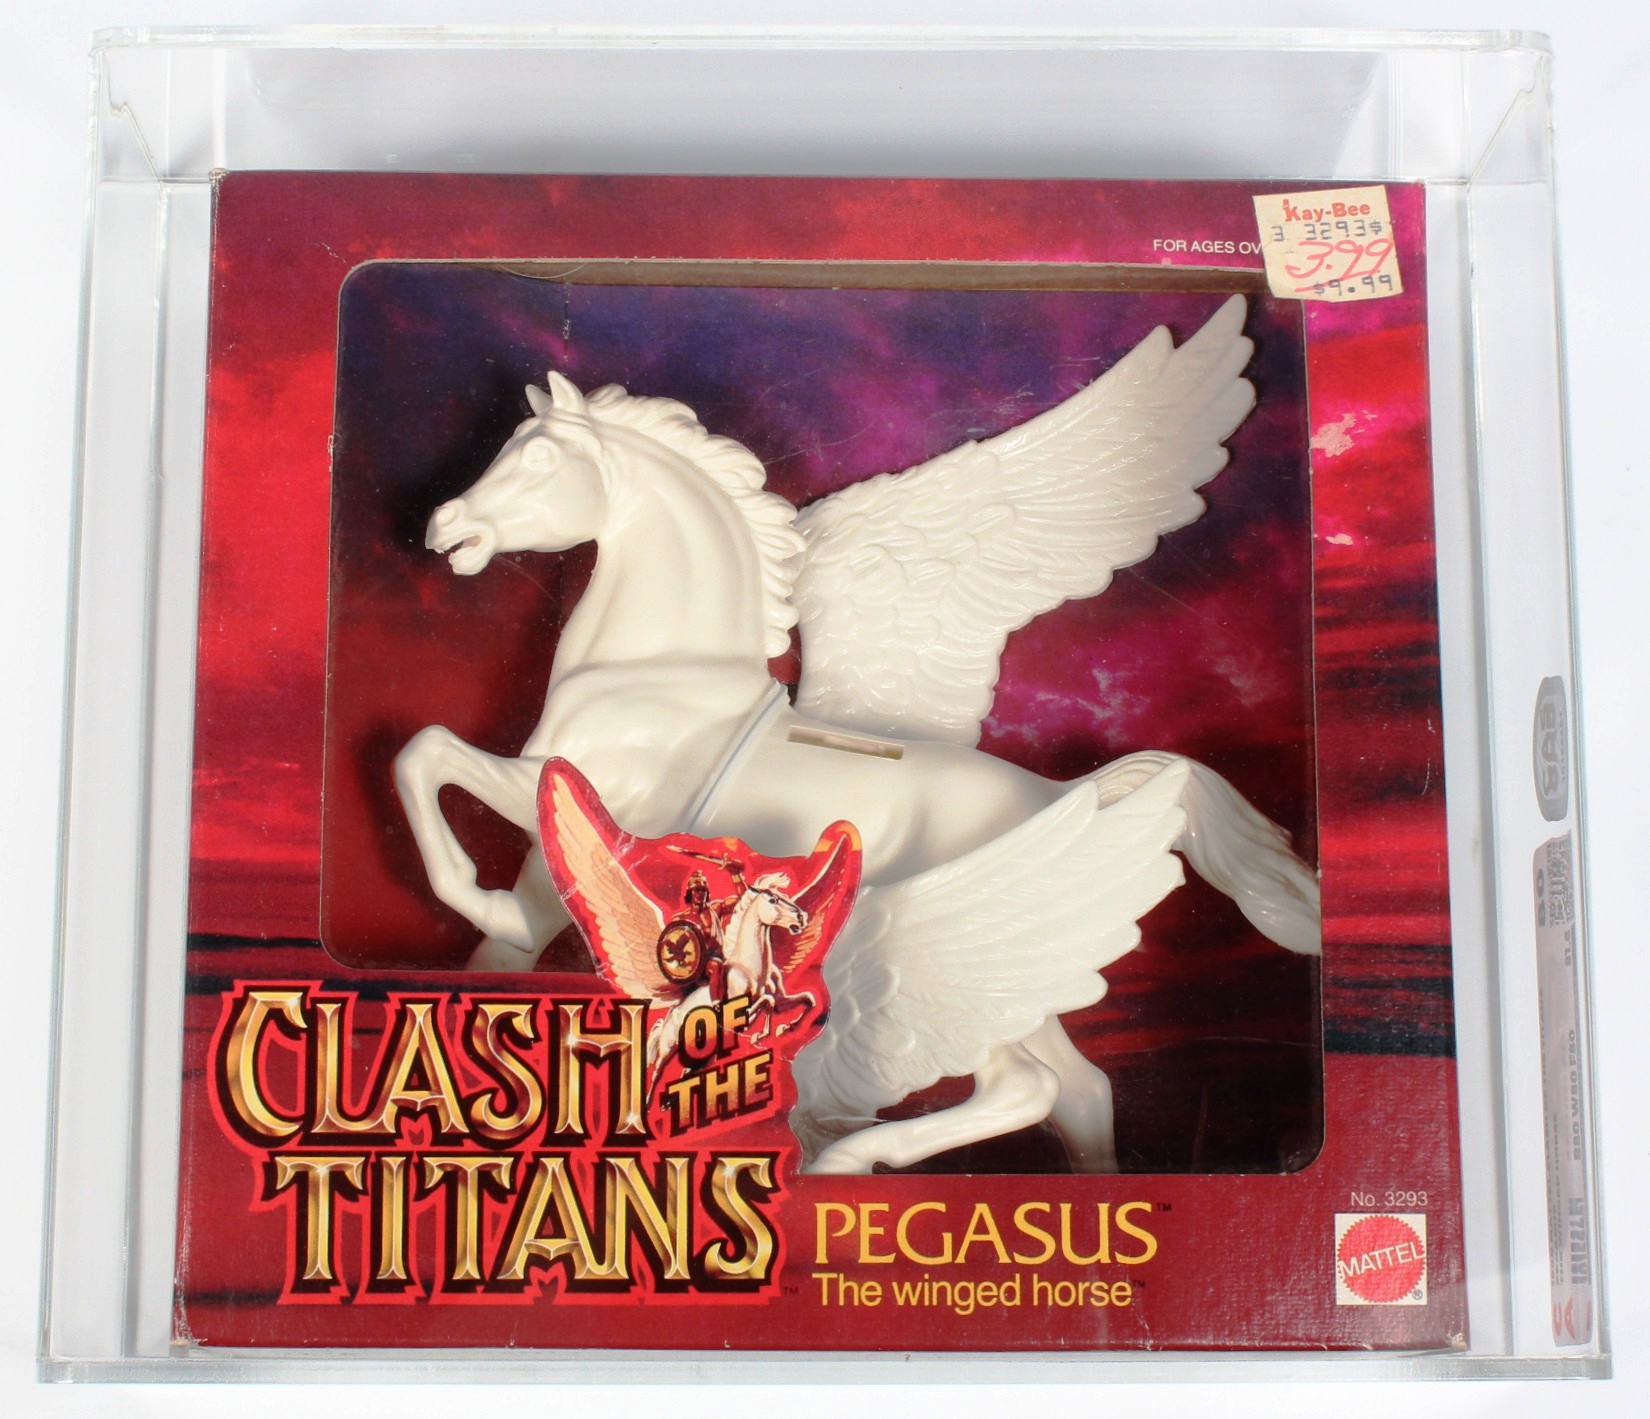 Clash Of The Titans 1981 + Clash Of The Titans 2010 Price in India - Buy  Clash Of The Titans 1981 + Clash Of The Titans 2010 online at